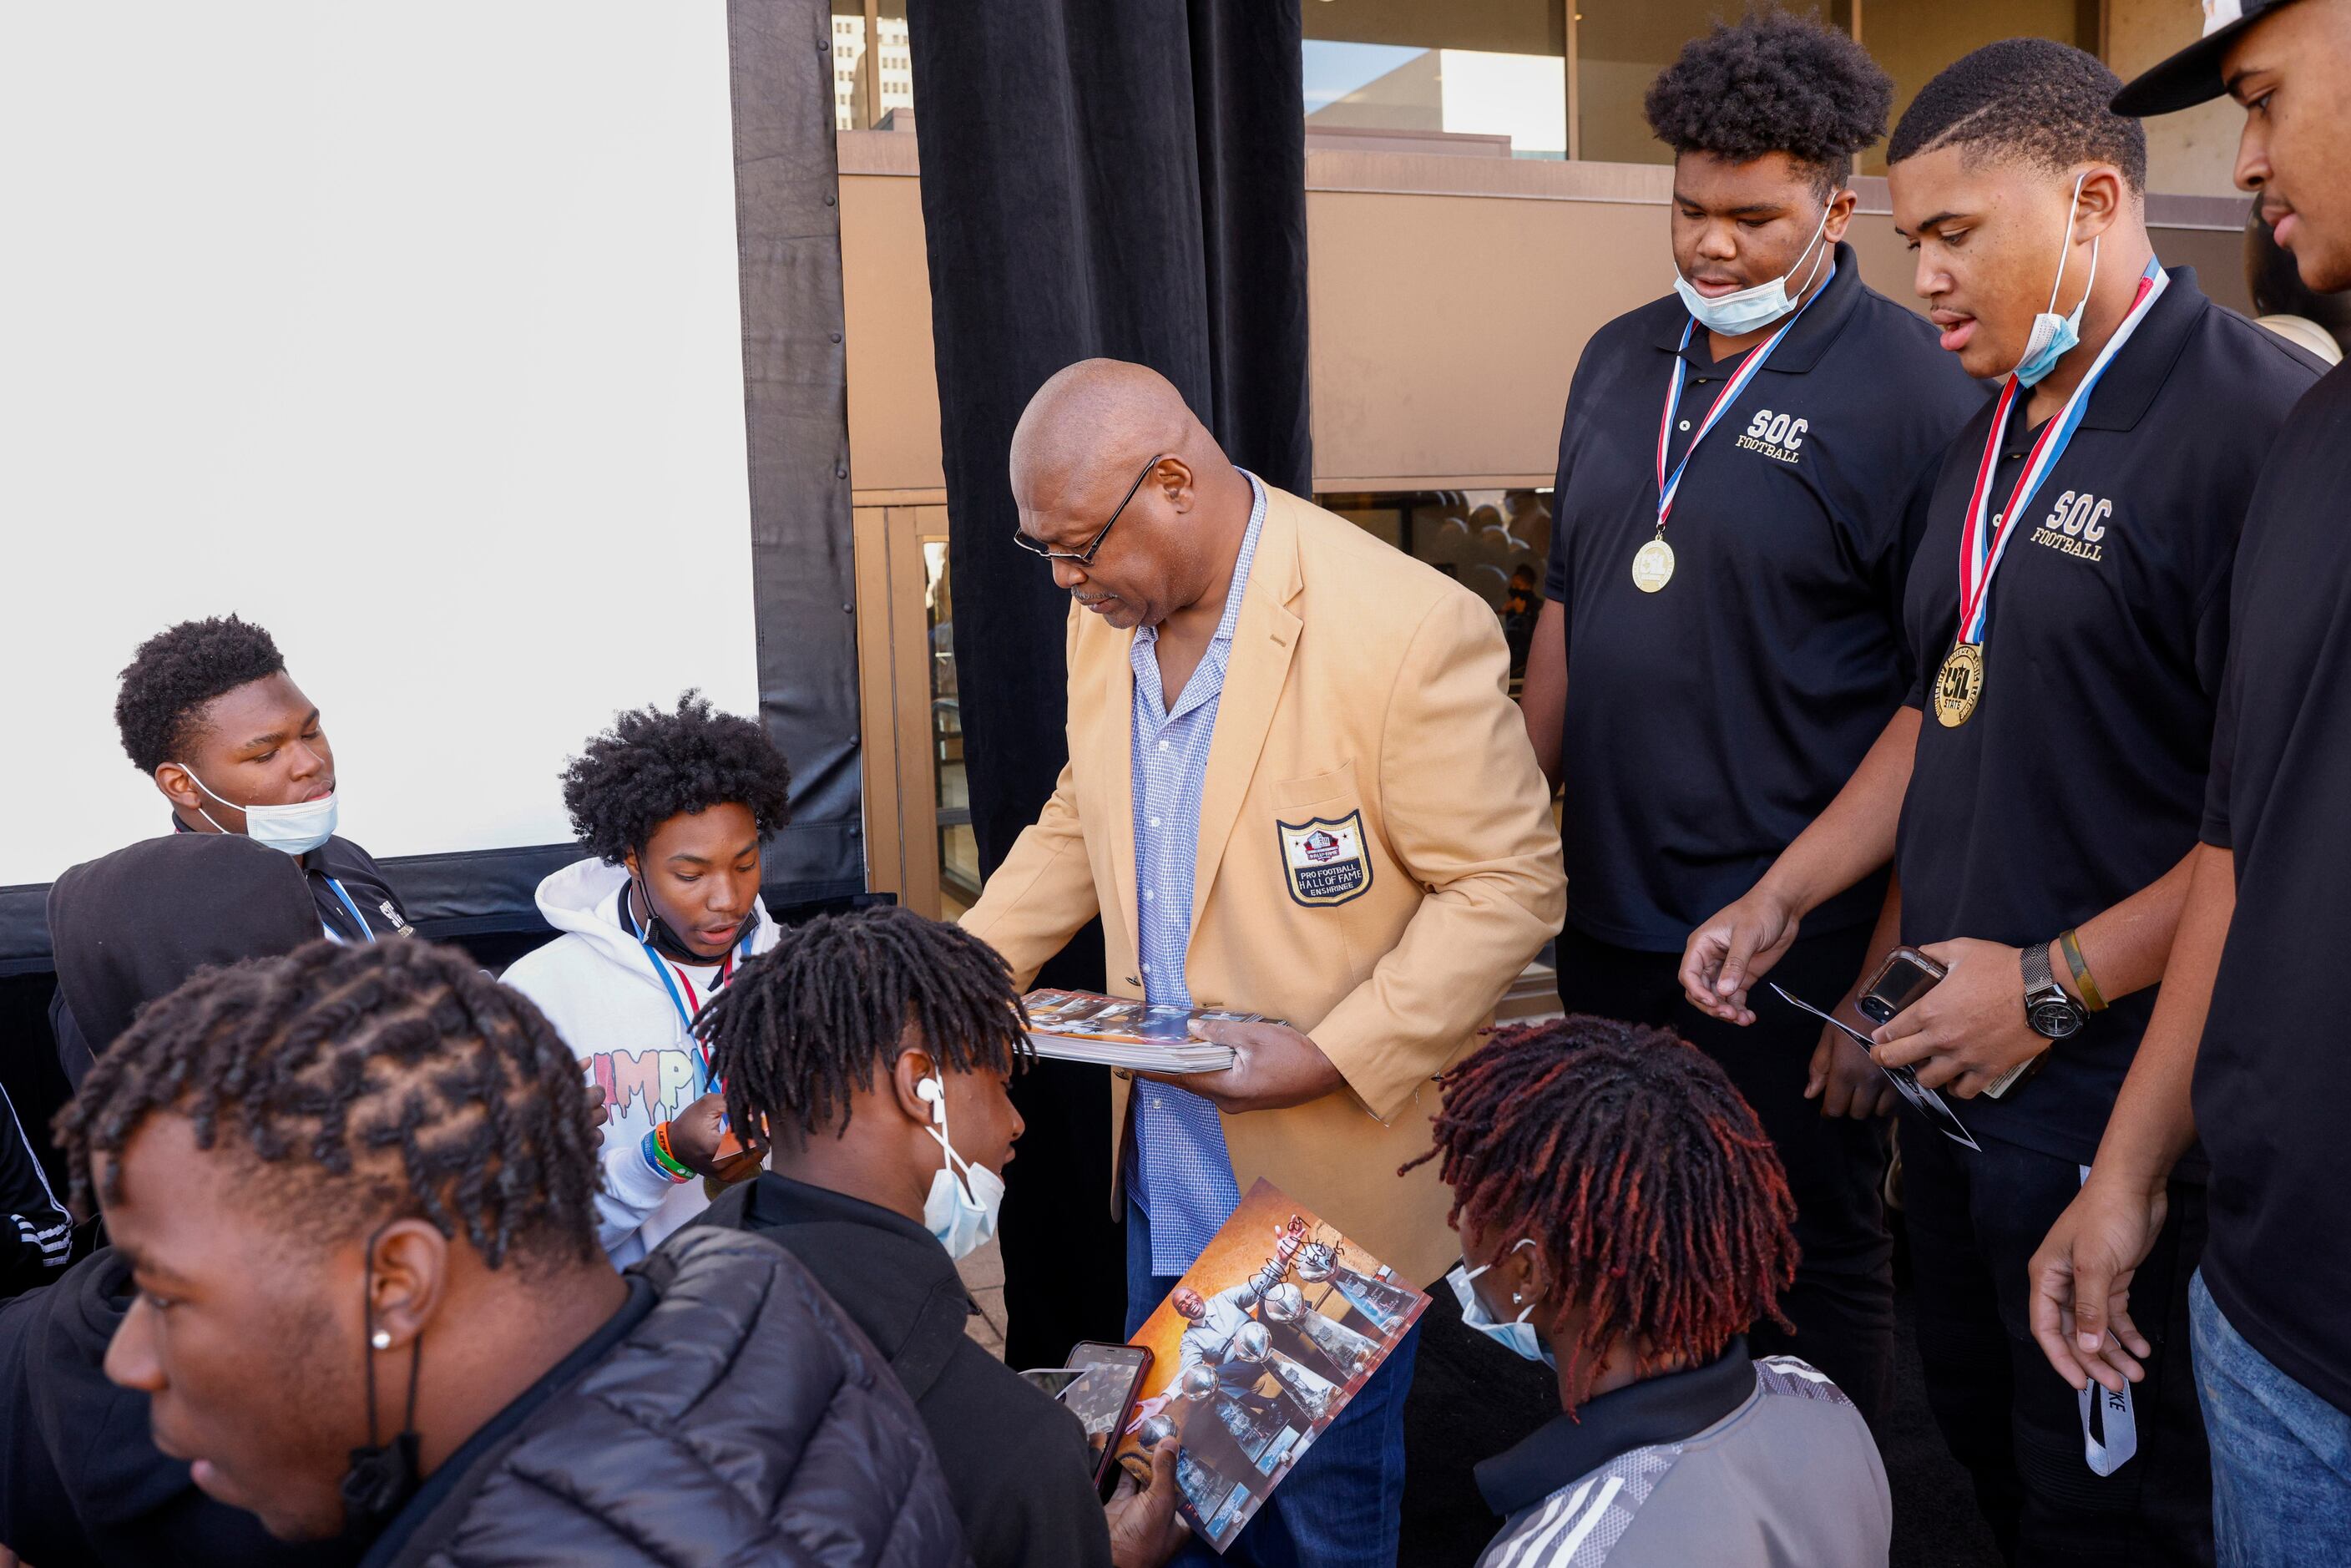 Former Dallas Cowboy Charles Haley hands out autographed photos of himself to South Oak...